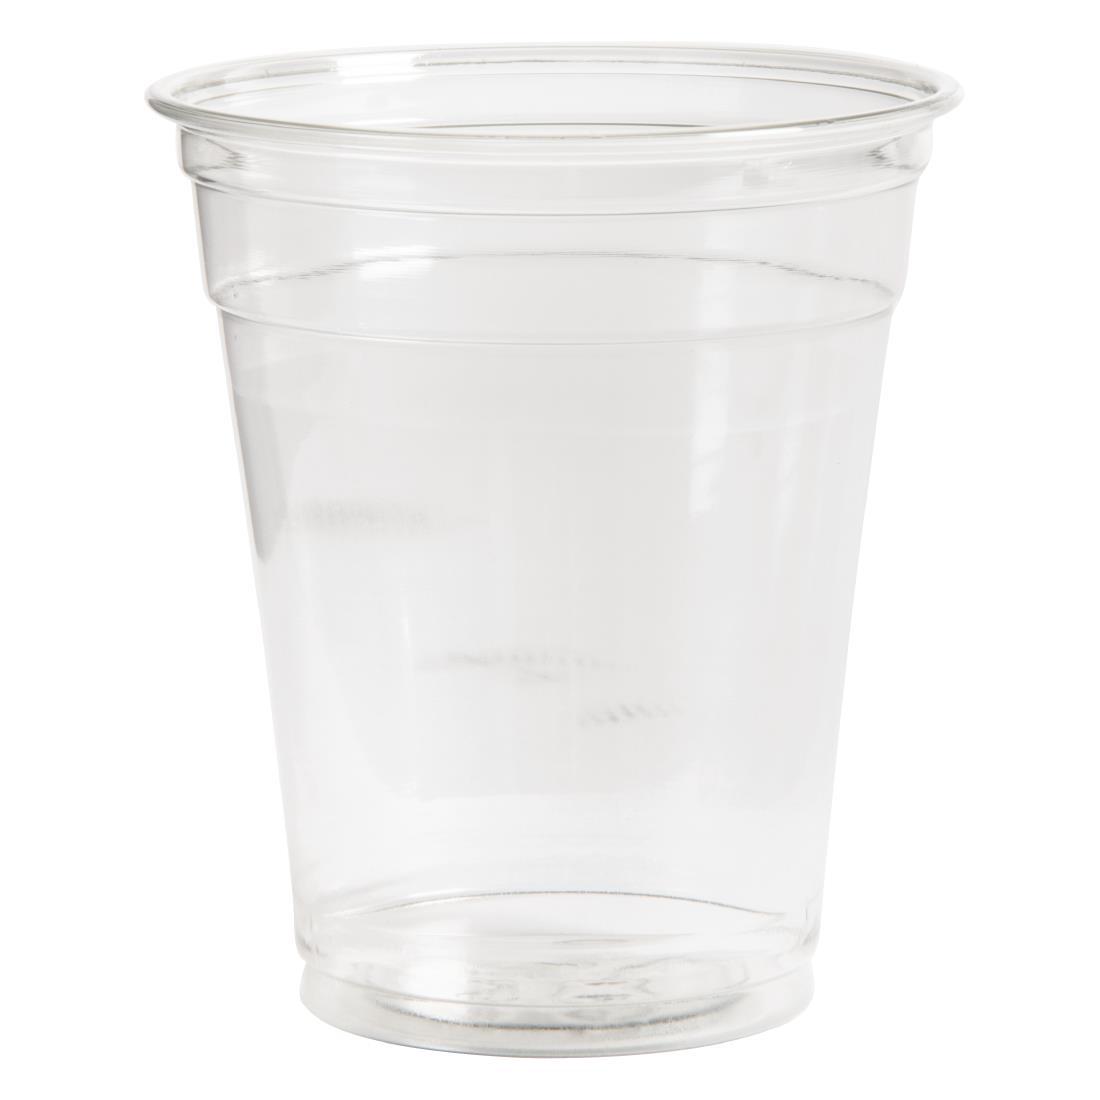 Disposable PET Glasses 398ml / 14oz (Pack of 50) - CW926  - 1